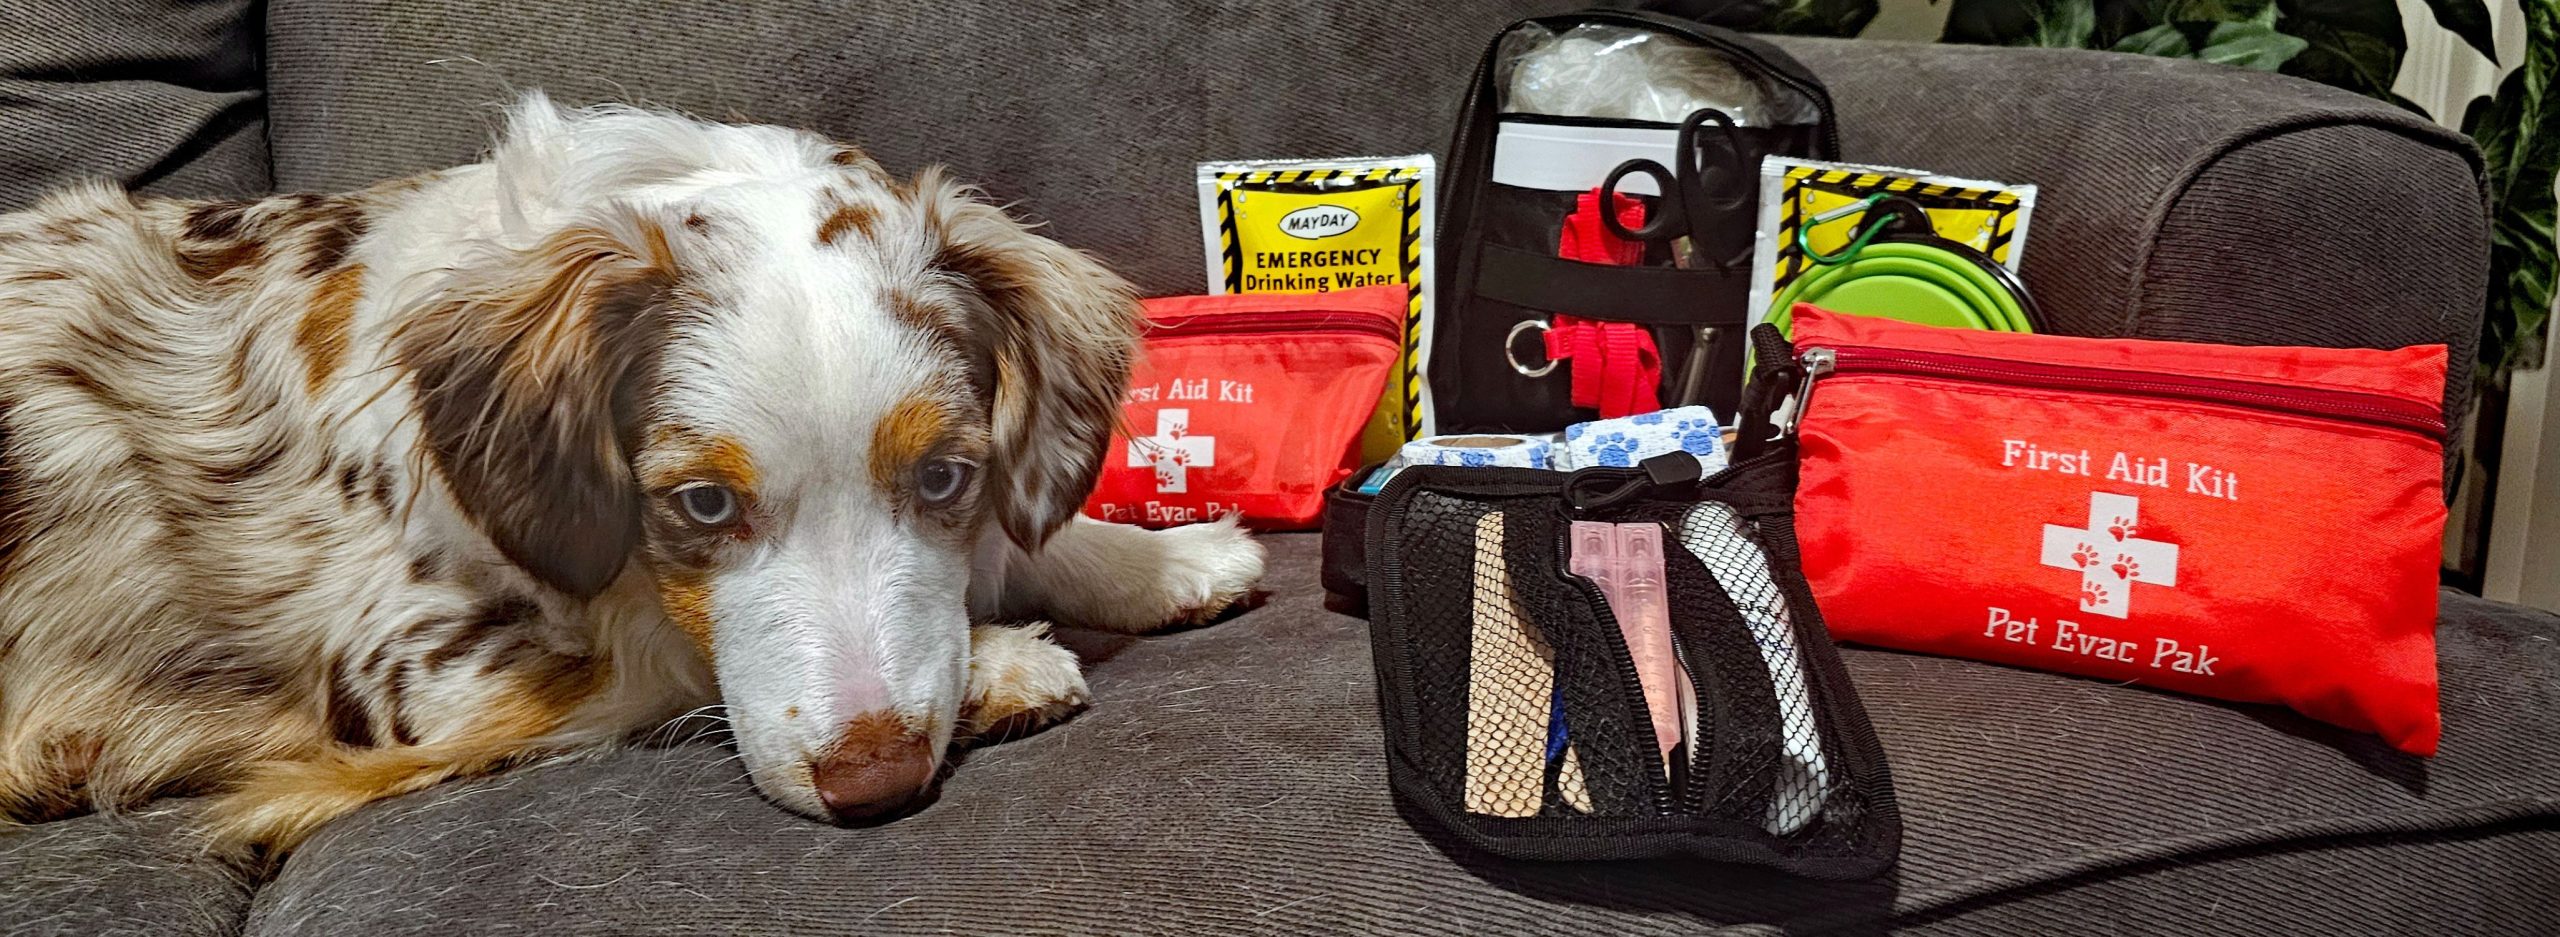 Emergency Pet First Aid